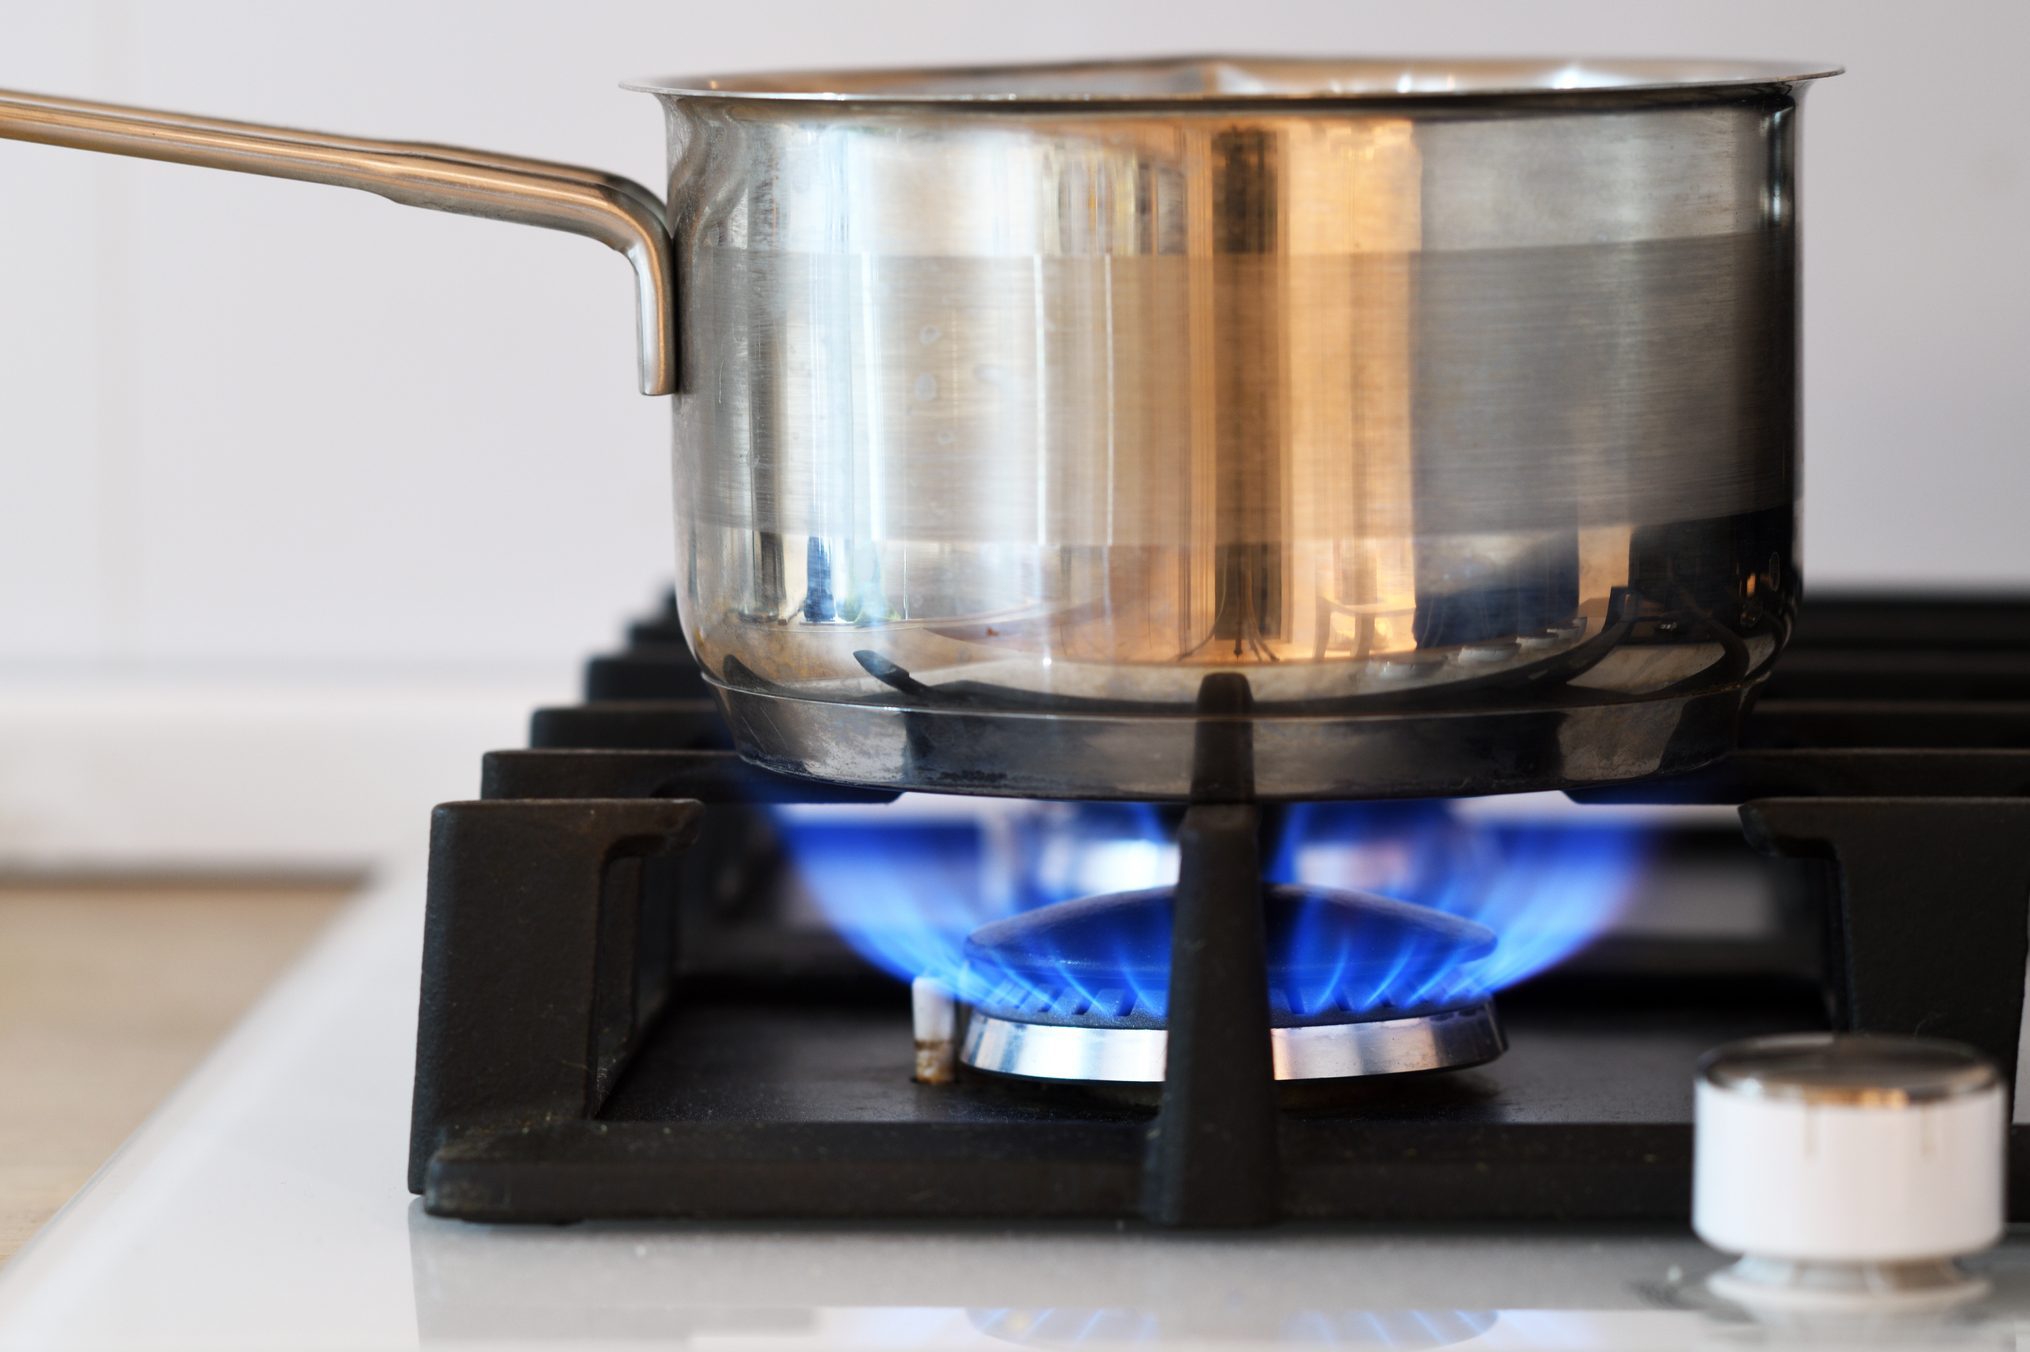 How To Fix a Gas Stove That Won’t Light